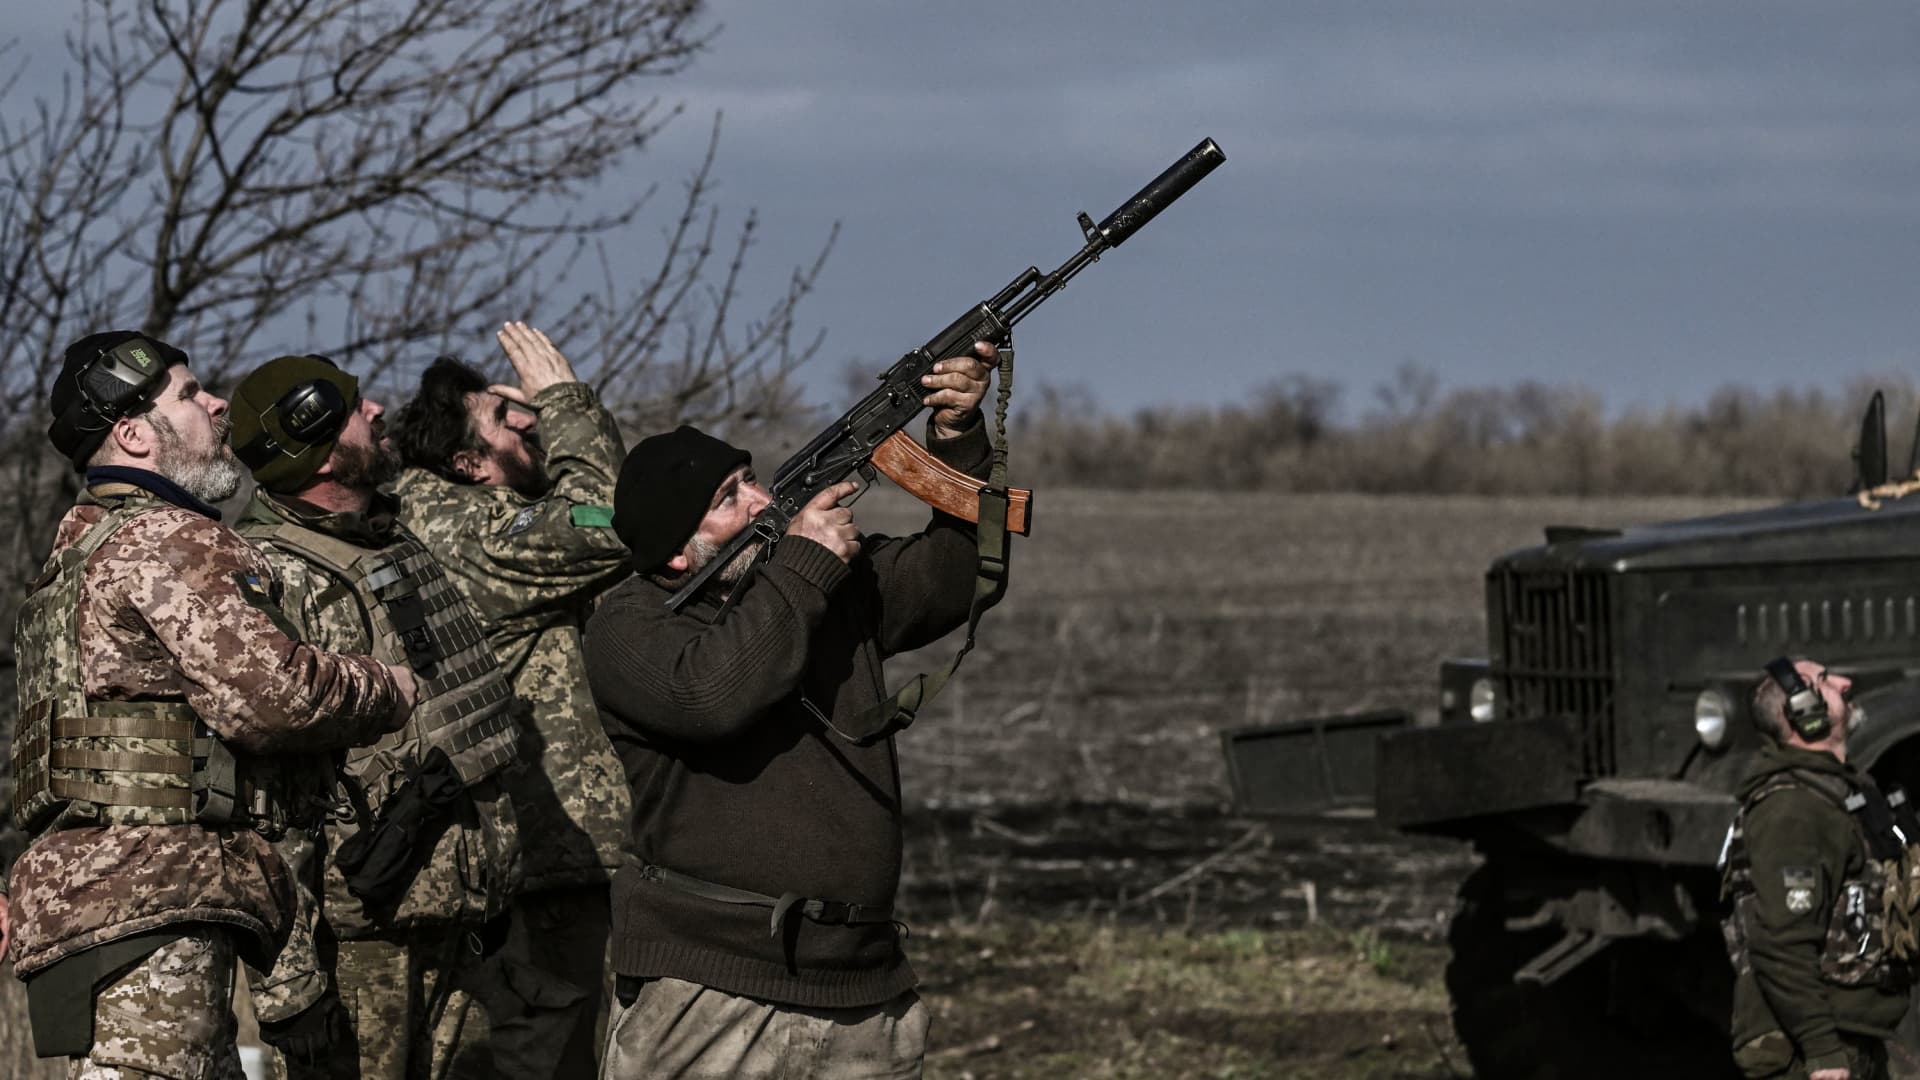 A Ukrainian serviceman fires with his rifle at a drone flying above their position near Bakhmut on March 20, 2023.